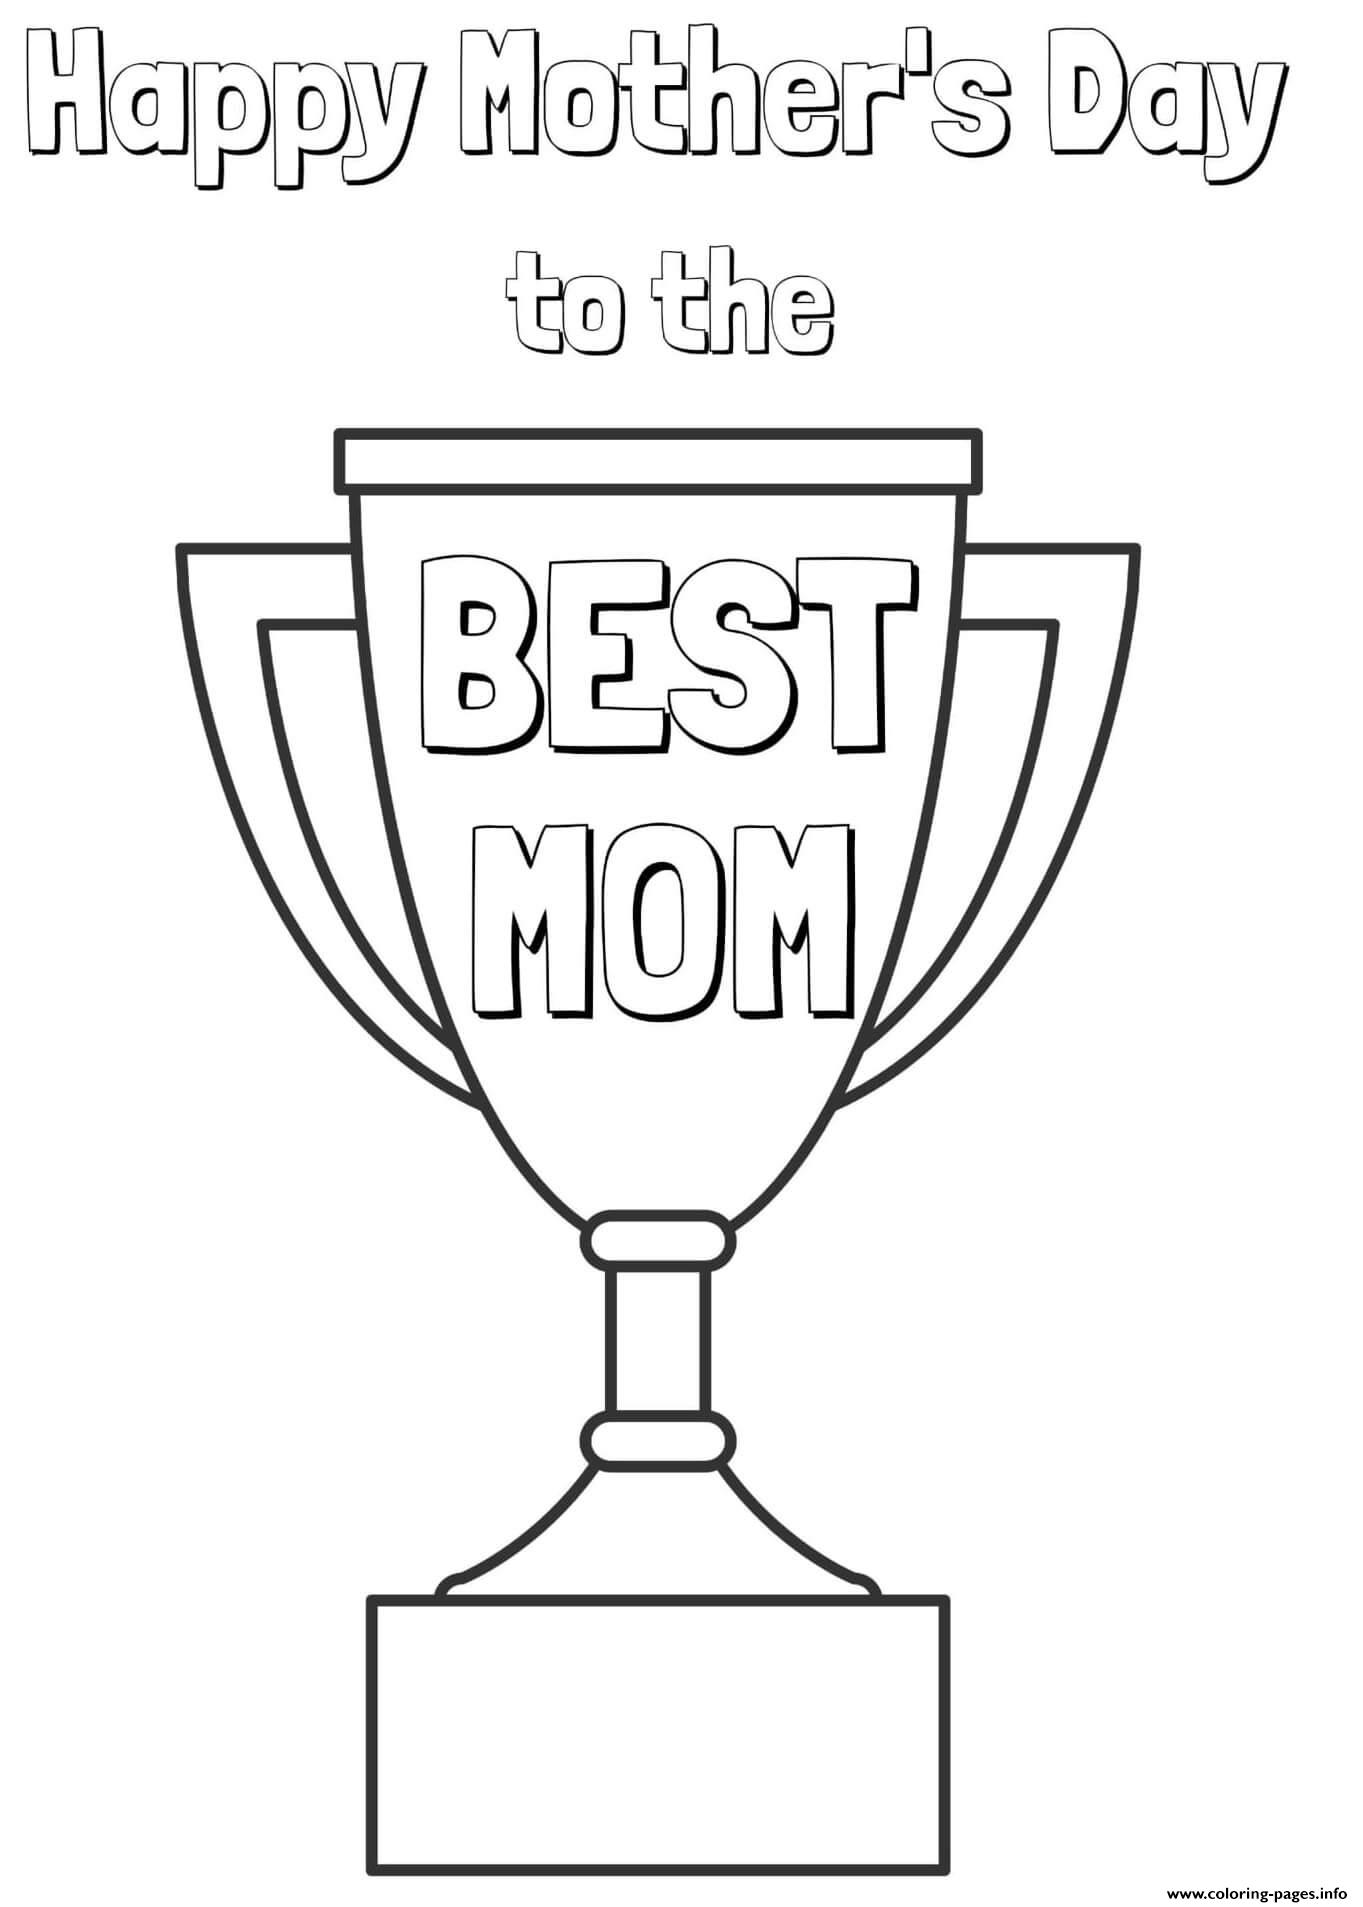 Mothers Day Best Mom Trophy coloring